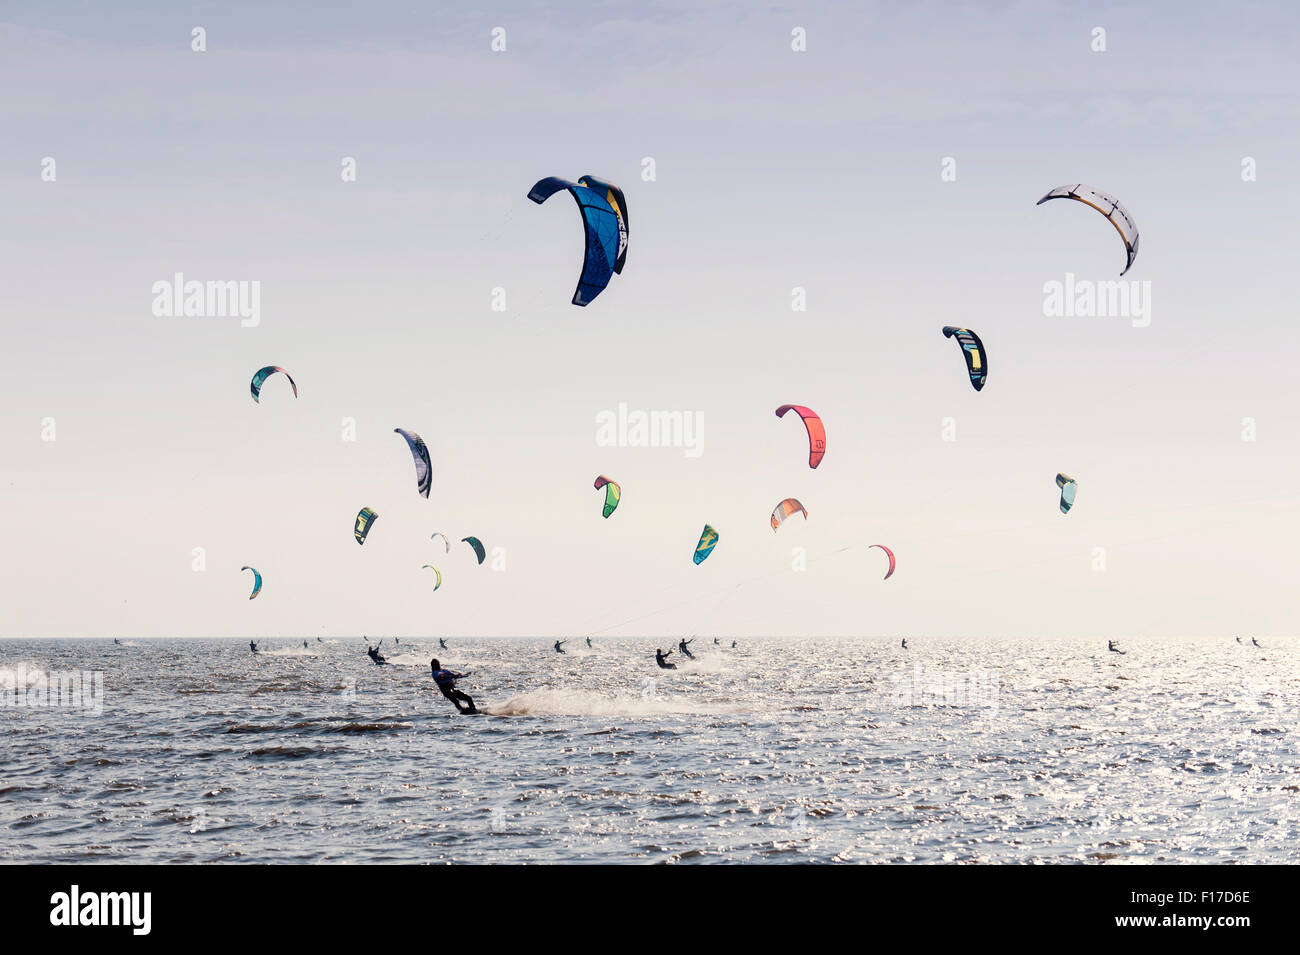 Impression of the Kitesurf World Cup in St. Peter-Ording, Germany, August 21-30 2015 Stock Photo